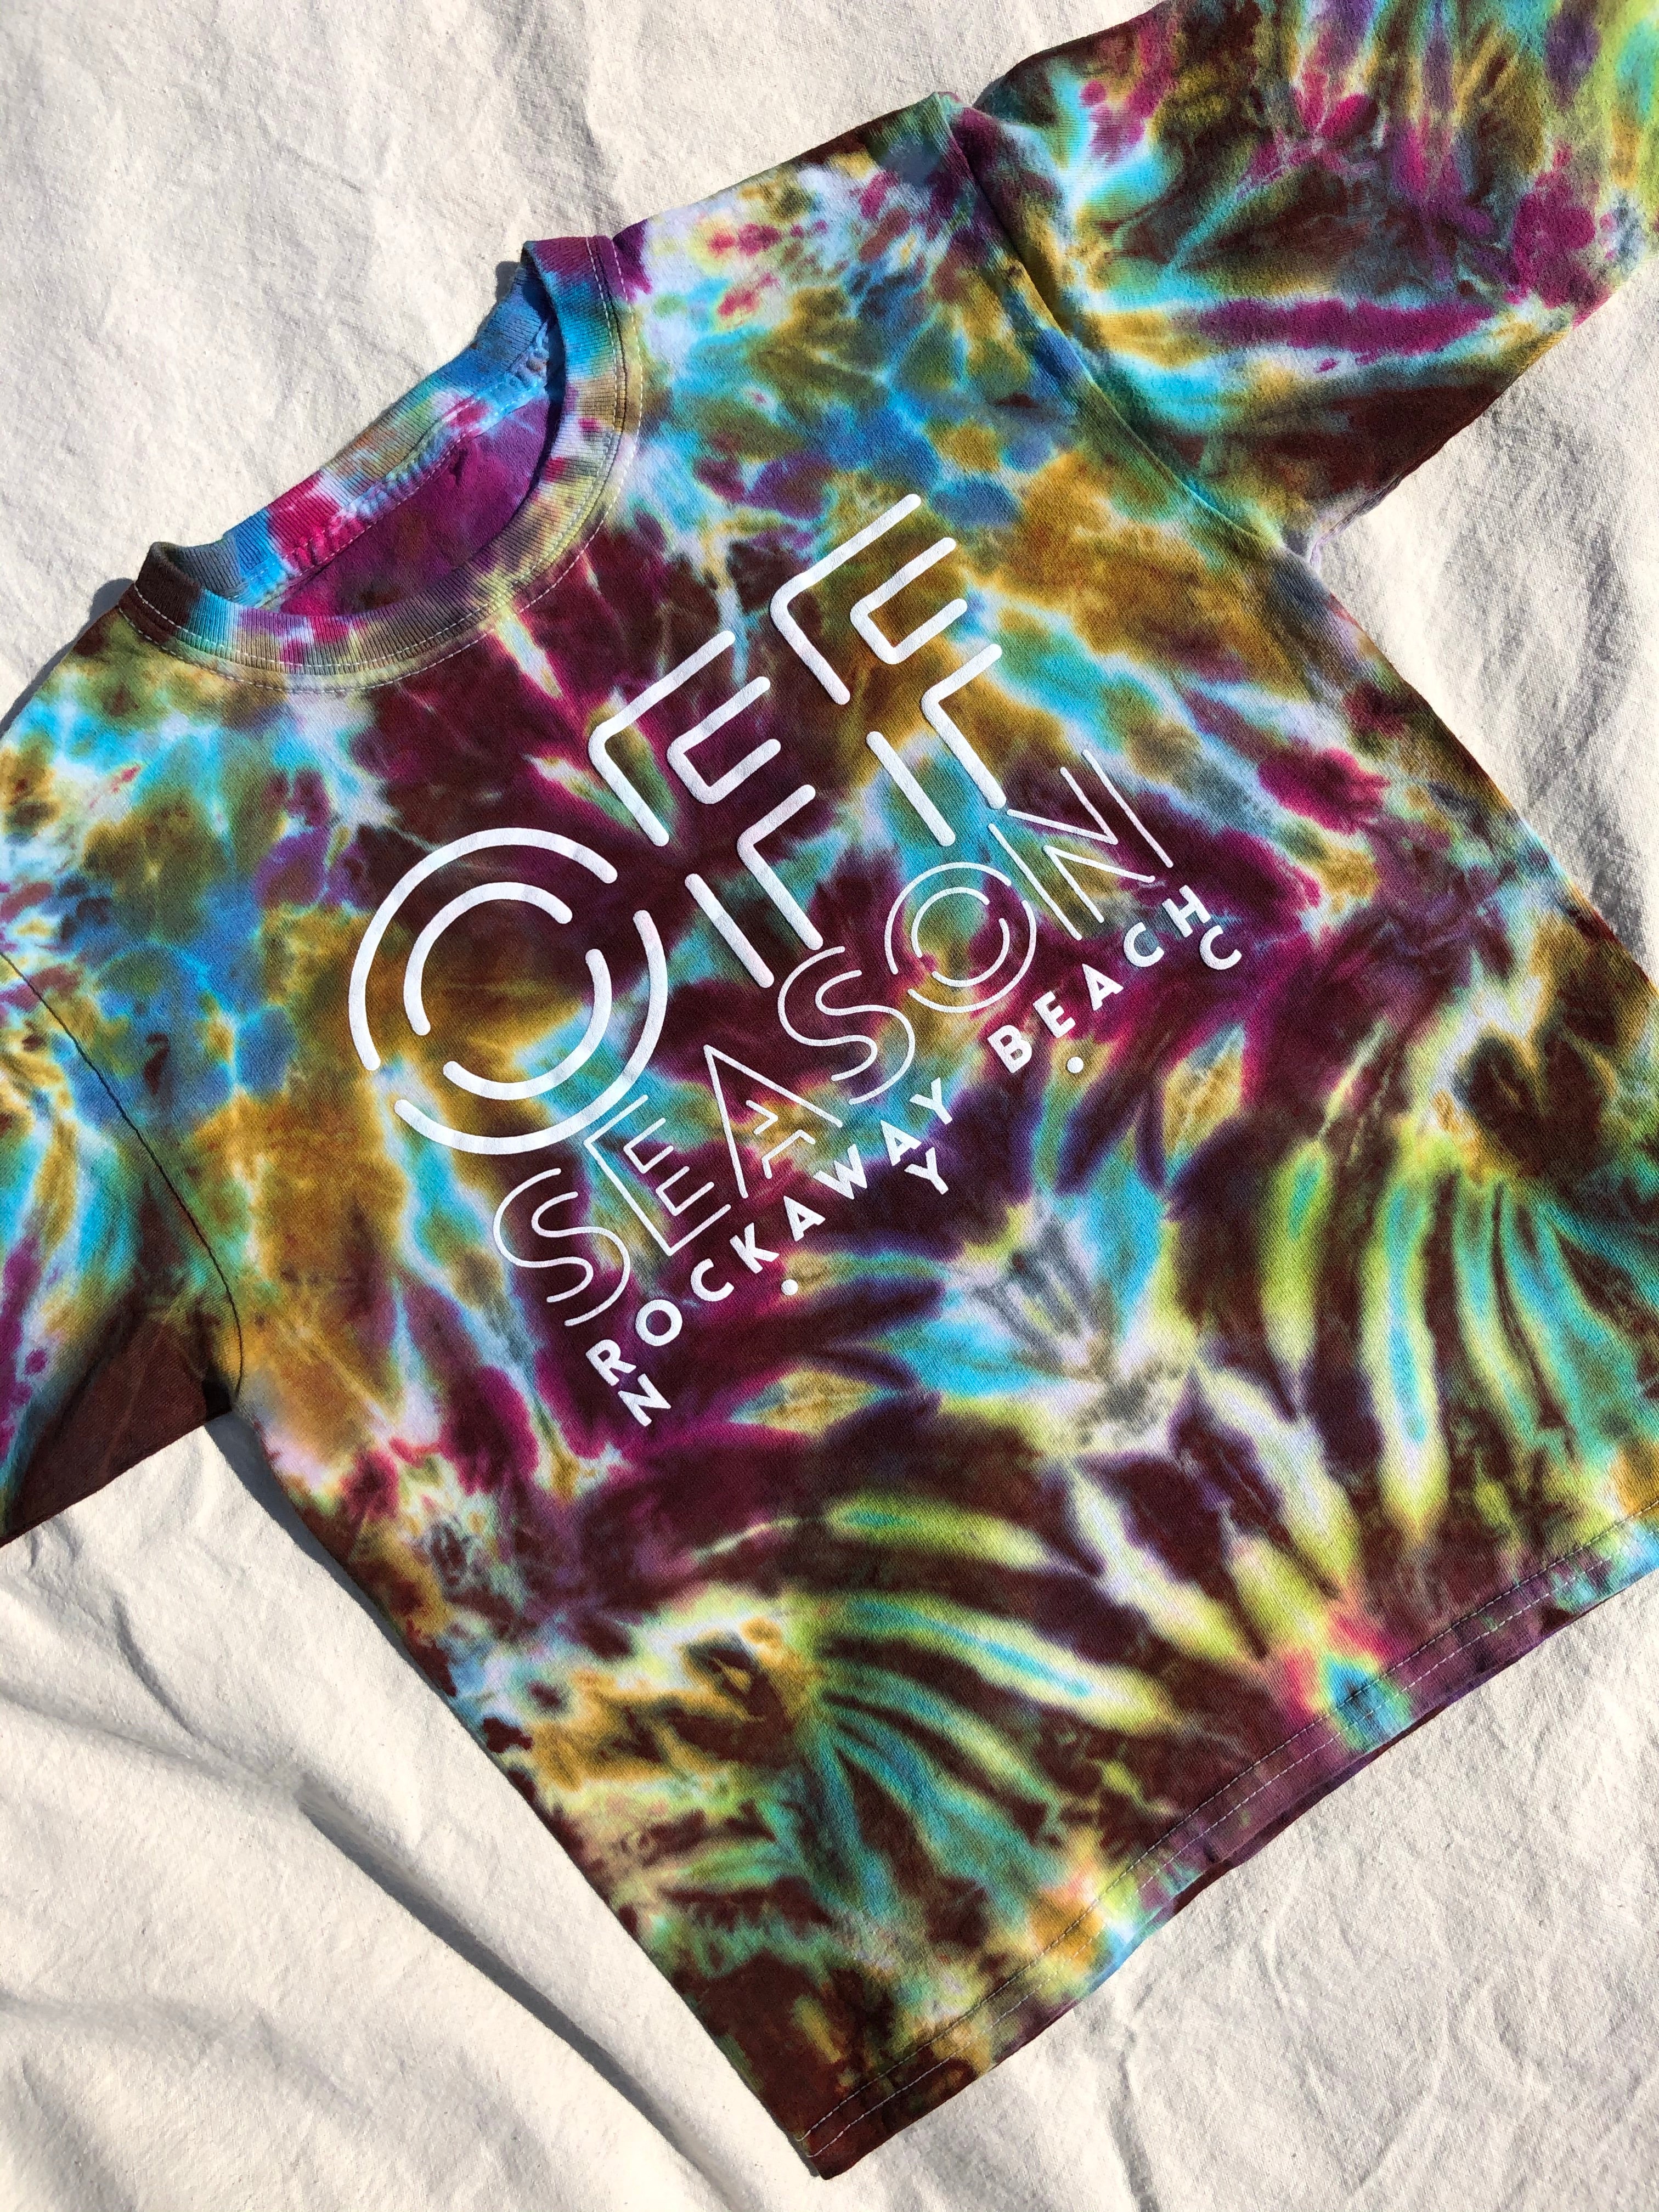 Youth Tie Dye Top #15 (size S)